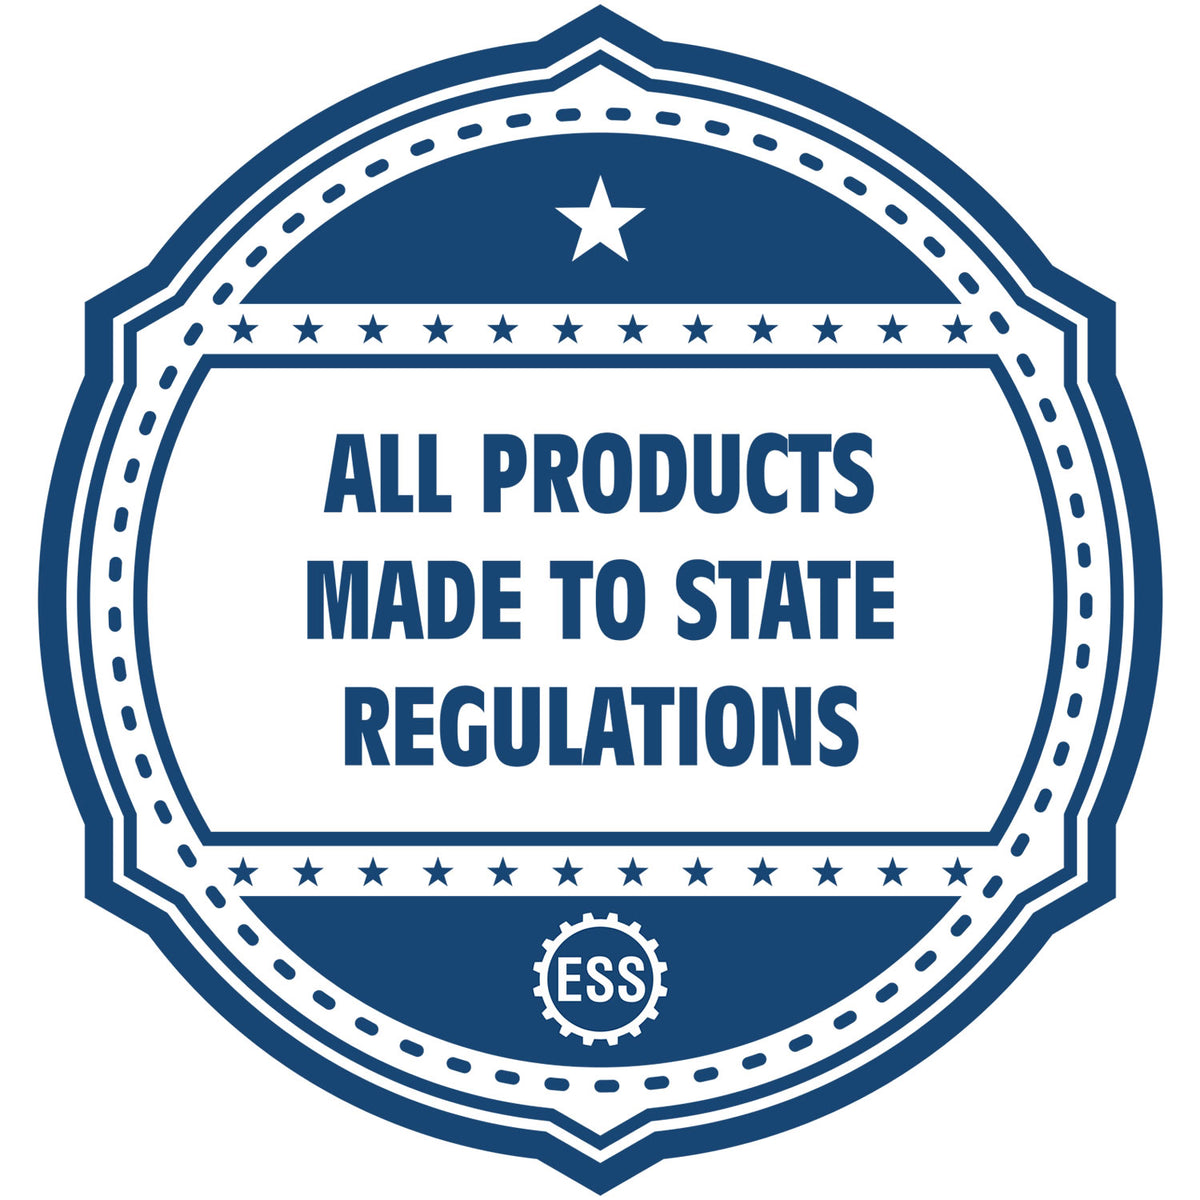 An icon or badge element for the PSI Pennsylvania Notary Stamp showing that this product is made in compliance with state regulations.